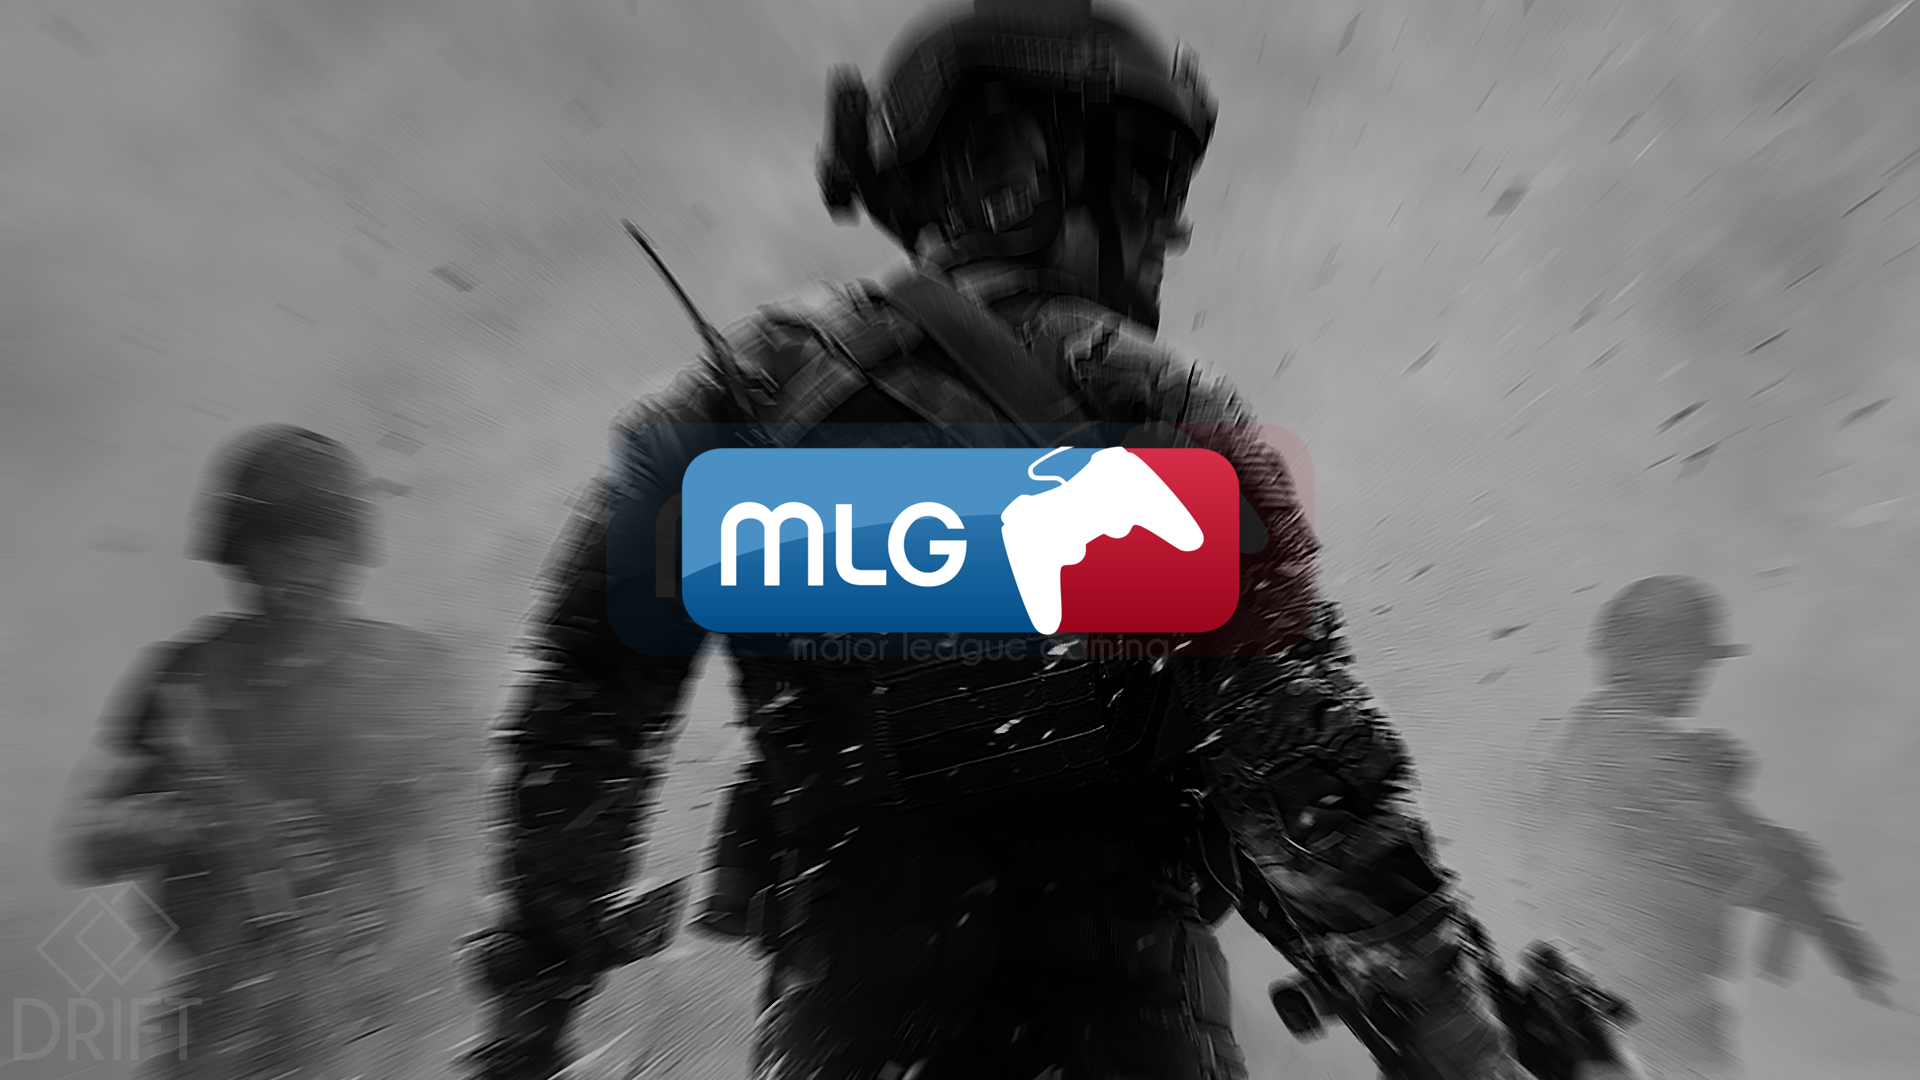 Mlg backgrounds free download backgrounds free mlg background best graphics